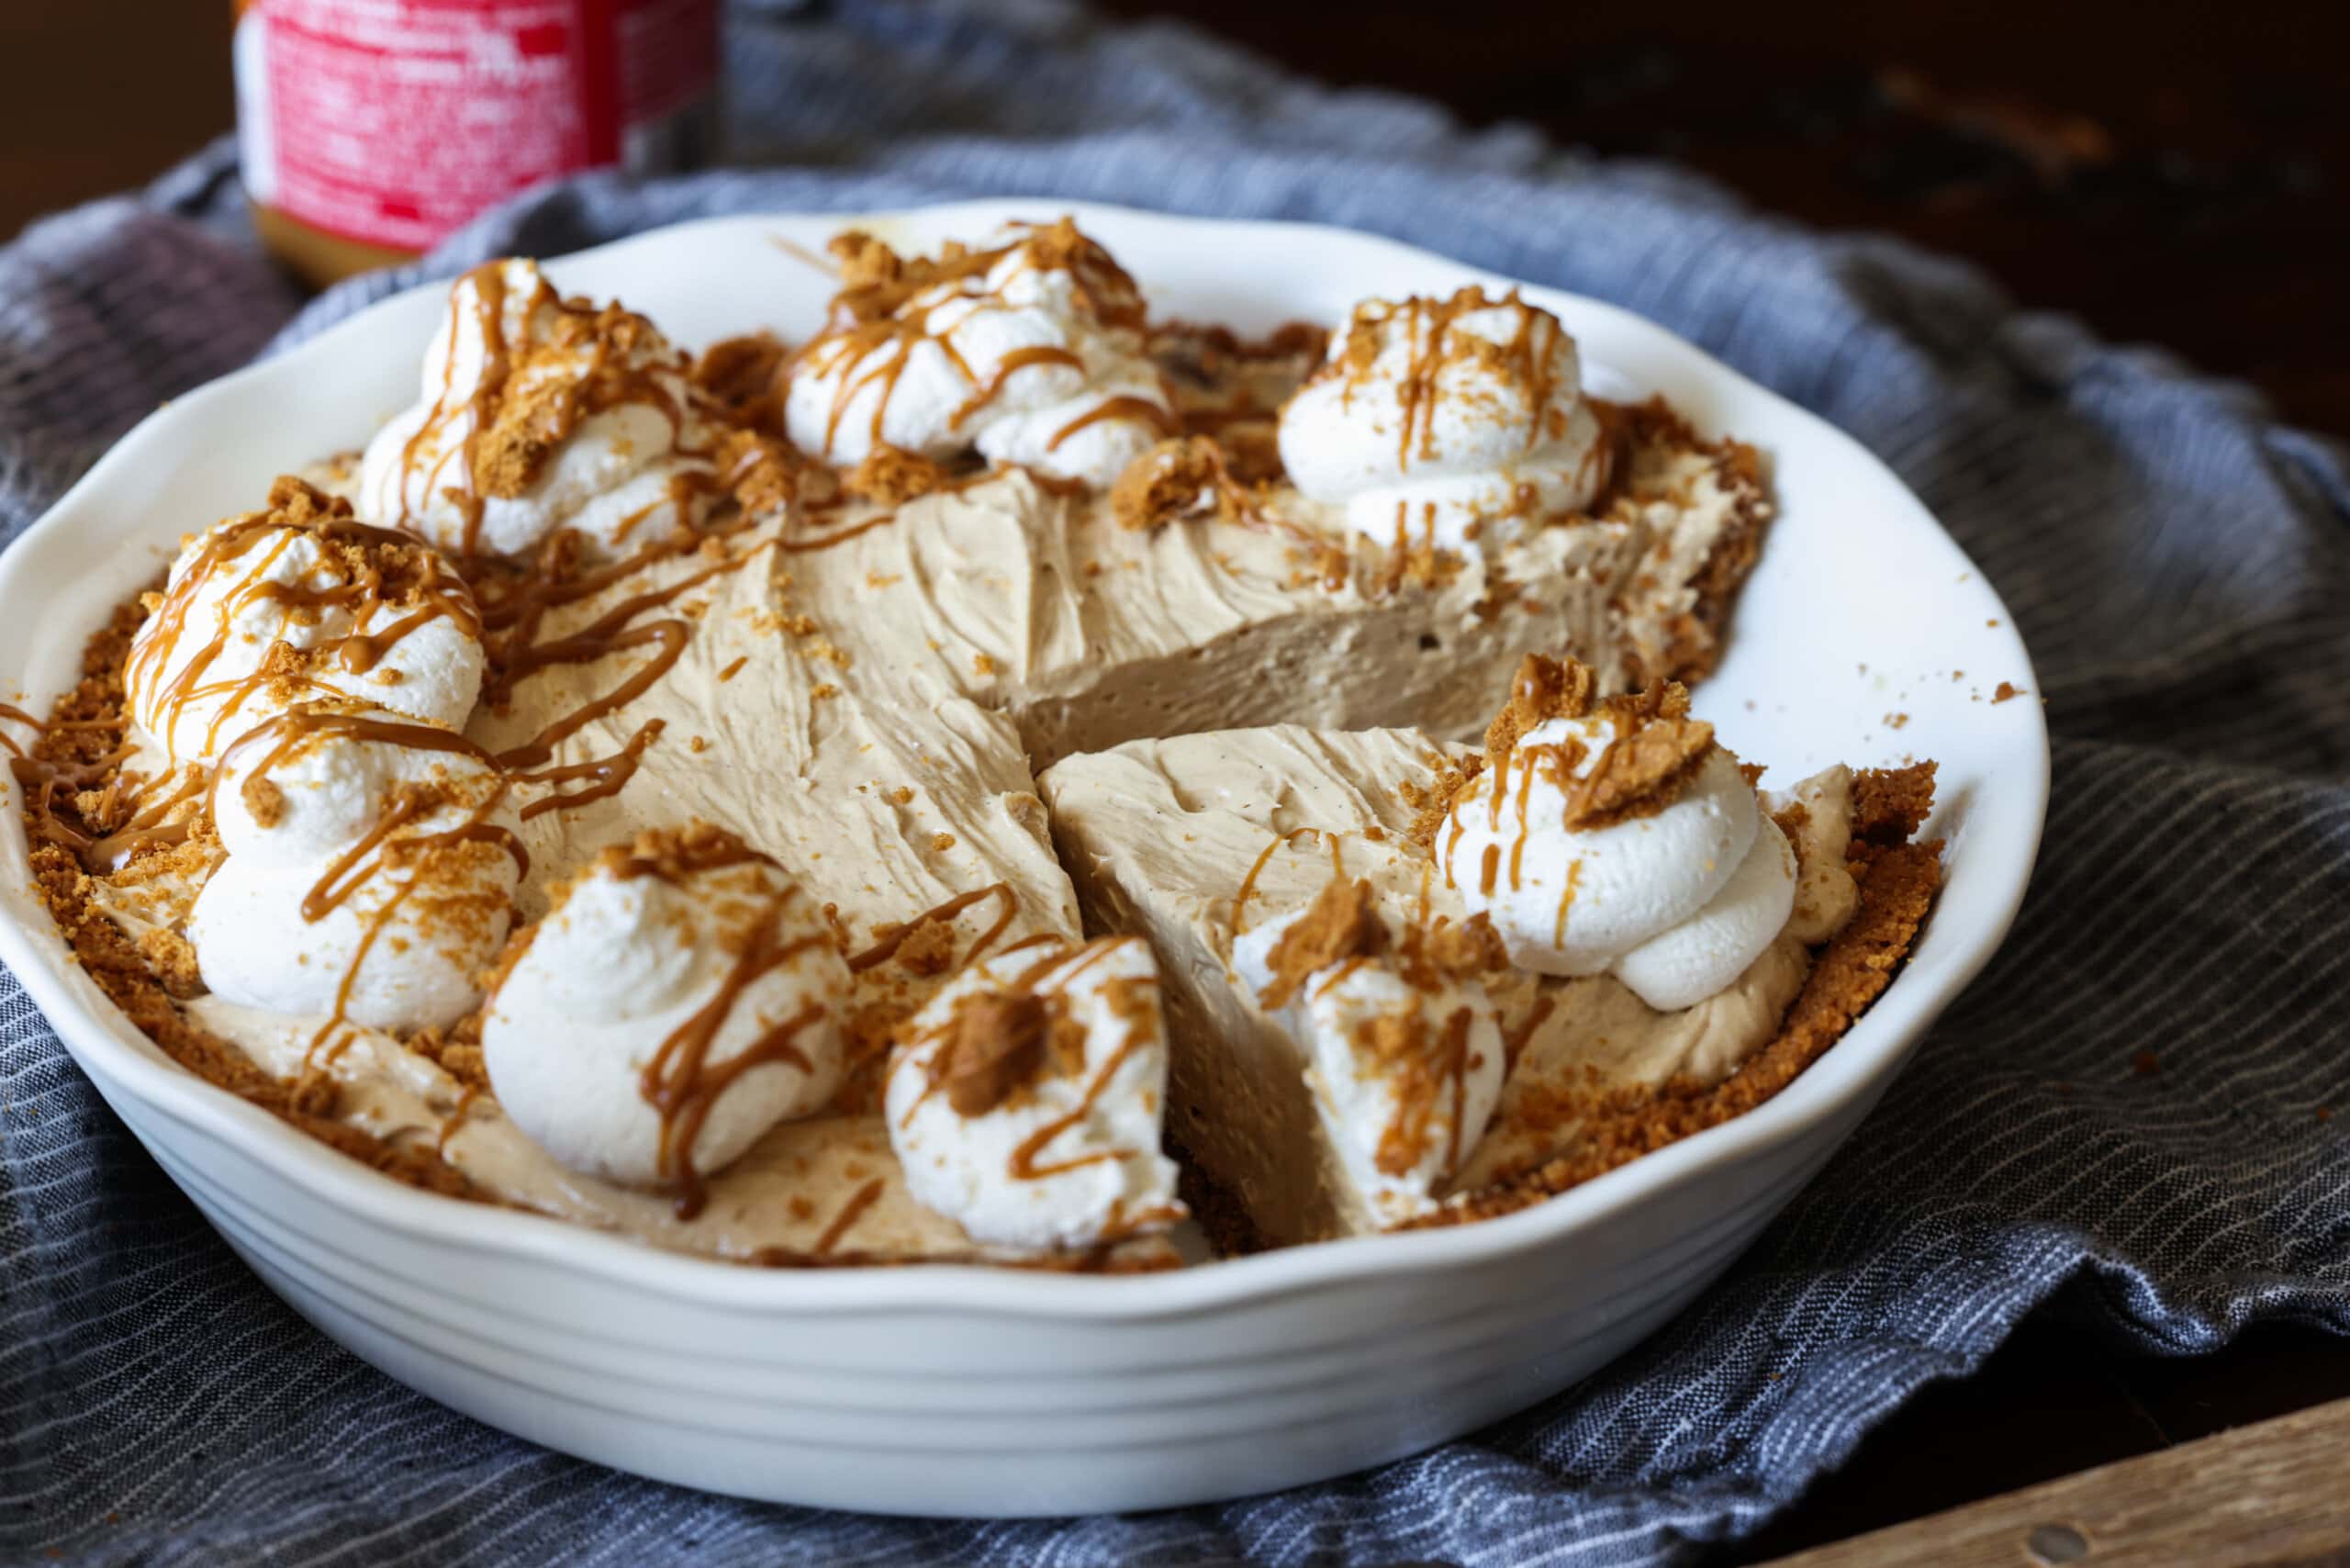 A biscoff mousse pie in a white pie plate with a slice cut